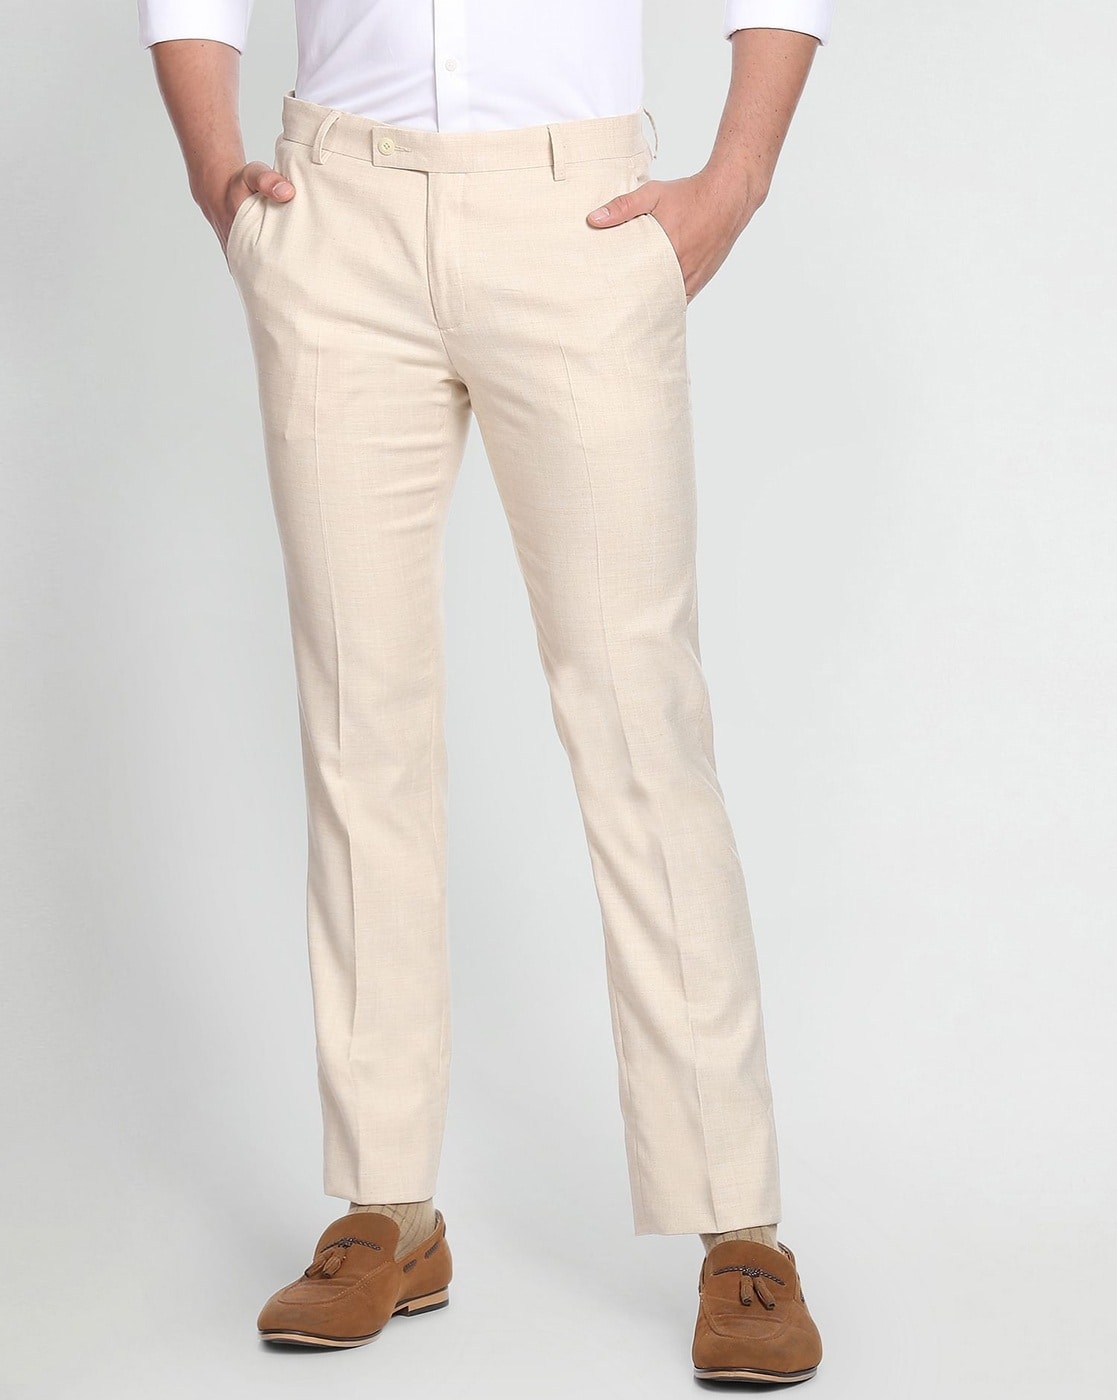 Buy Arrow Hudson Tailored Regular Fit Patterned Formal Trousers - NNNOW.com